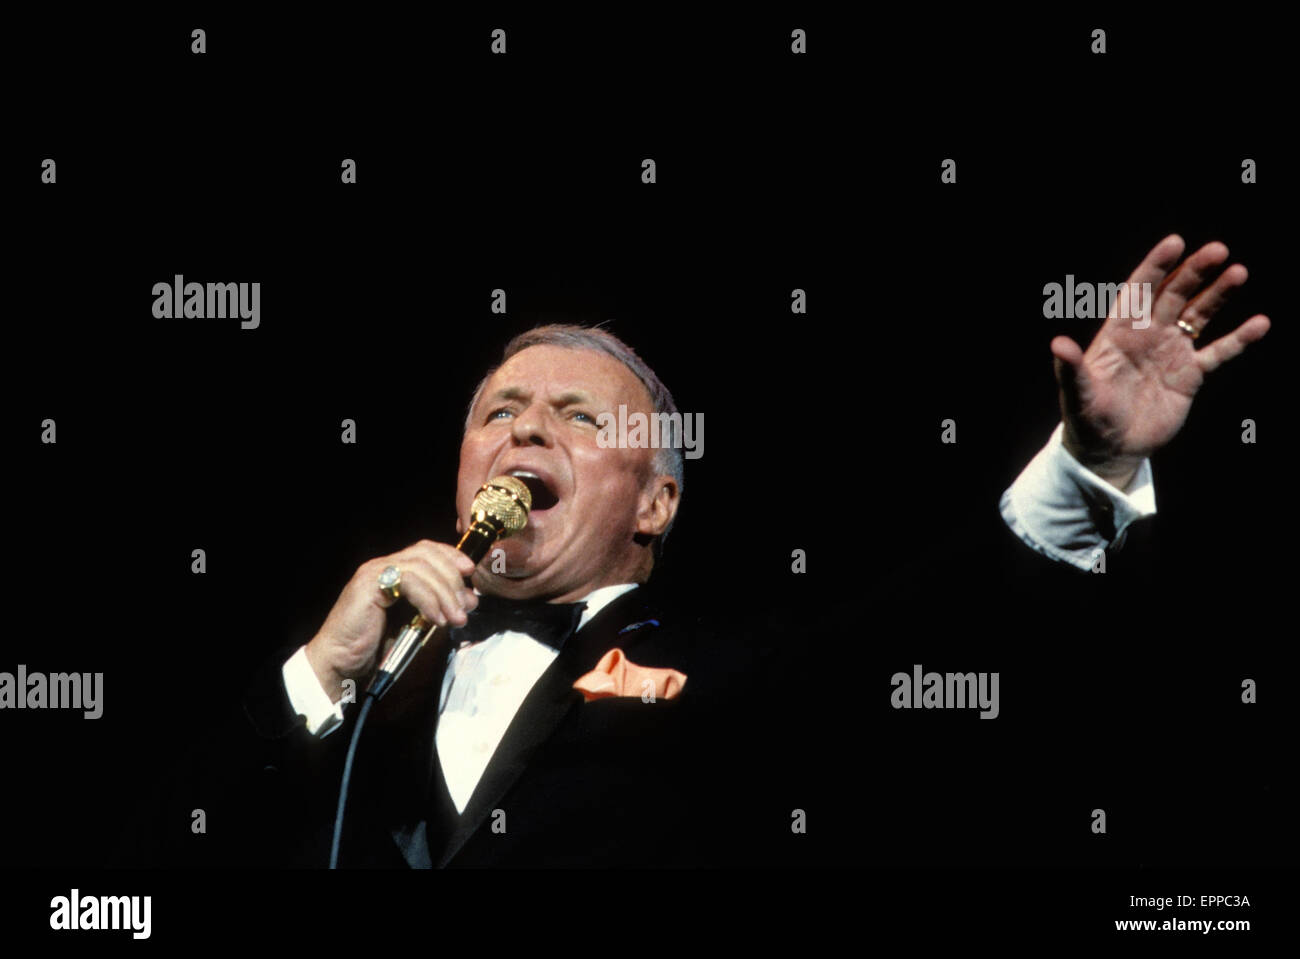 Chicago 9-10-1986 Frank Sinatra performs at the reopening of the Chicago Theater. The reopening marked the culmination of a four-year preservation effort at a cost of 18 million dollars which left the current seating capacity of the theatre at 3,600. the gala reopening was symbolic because Sinatra had performed at the theatre in the 1950's. Stock Photo